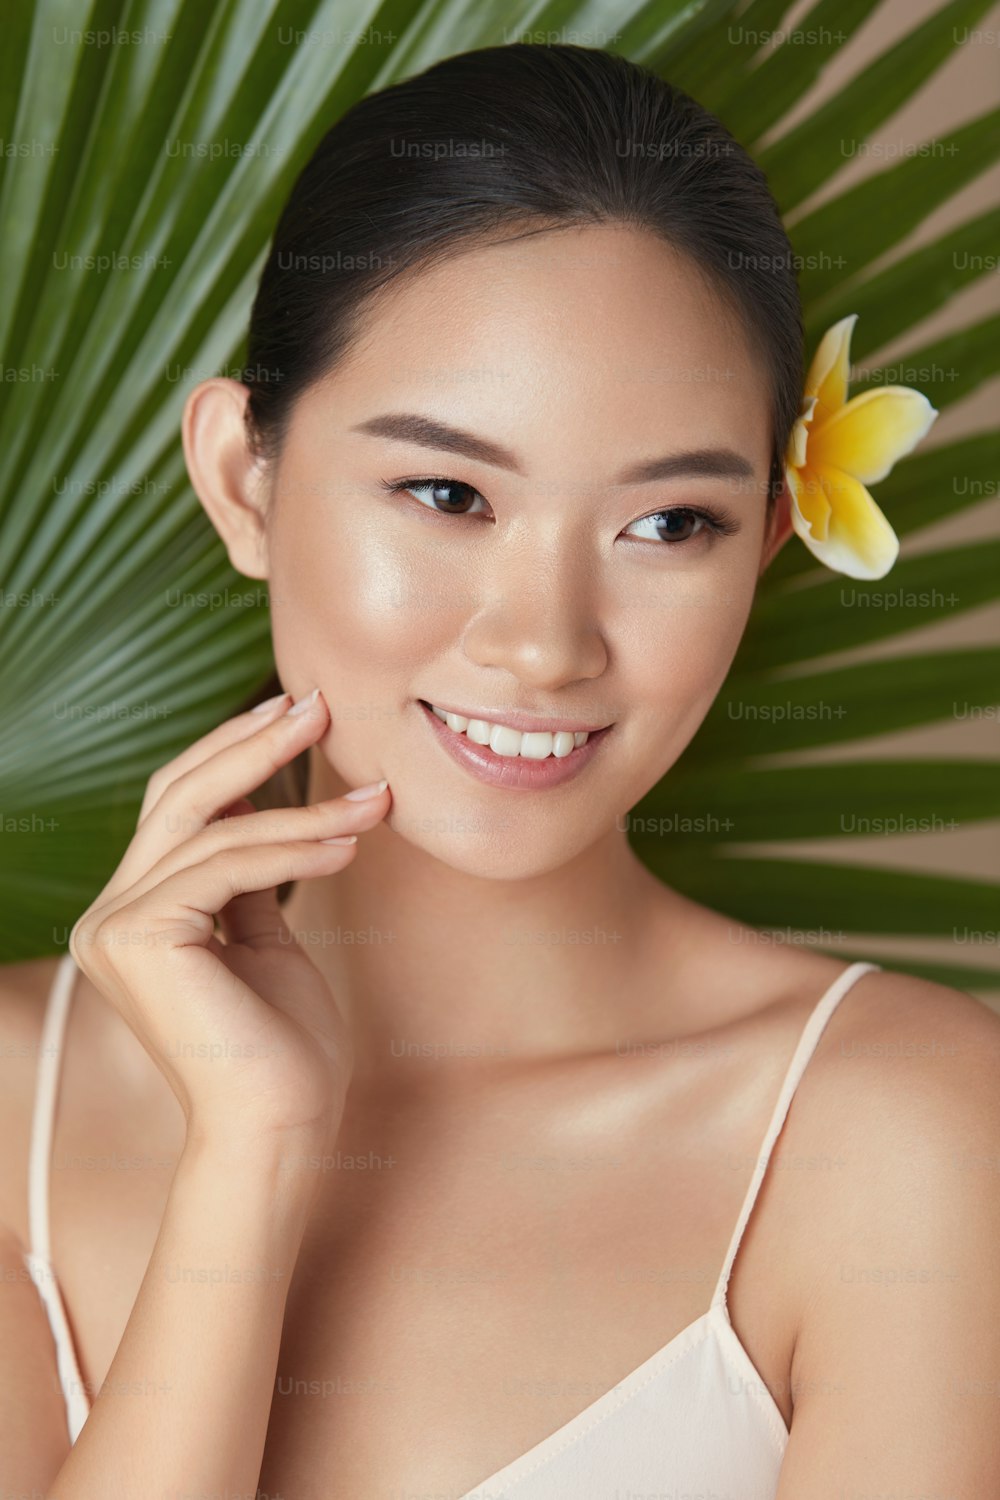 Beauty. Woman On Leaf Background Portrait. Beautiful Asian Model With Flower In Hair Touching Face And Looking Away. Young Female With Perfect Skin And Natural Makeup After Using Organic Cosmetic.